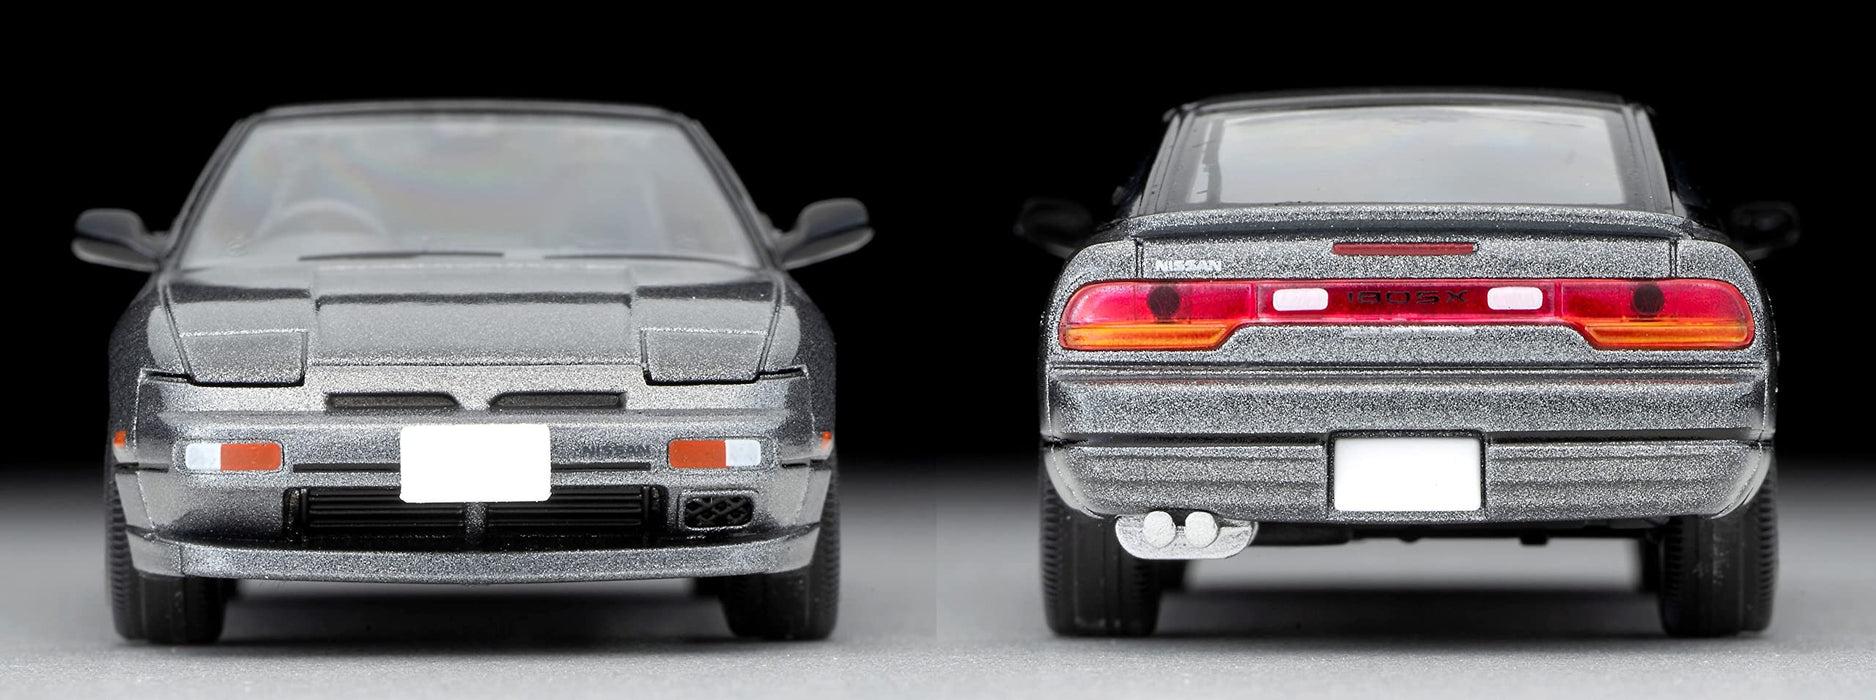 Tomytec Tomica Limited Vintage Neo 1/64 Nissan 180Sx Type-Ii Gray M89 Japan 316831